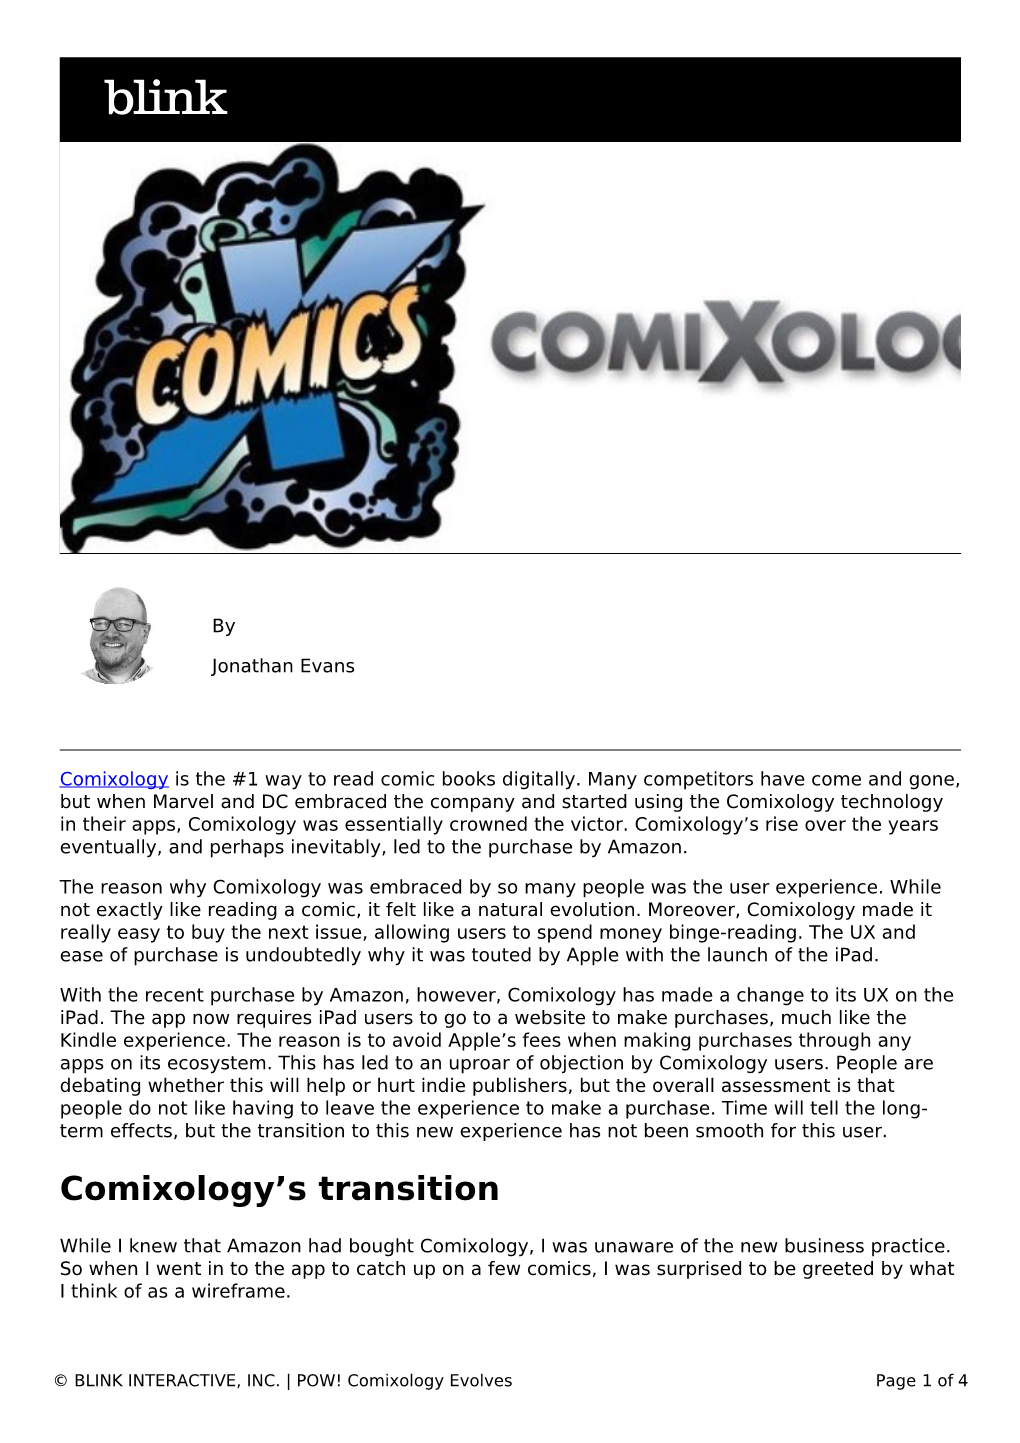 POW! Comixology Evolves Page 1 of 4 Comixology Looking Like a Wireframe